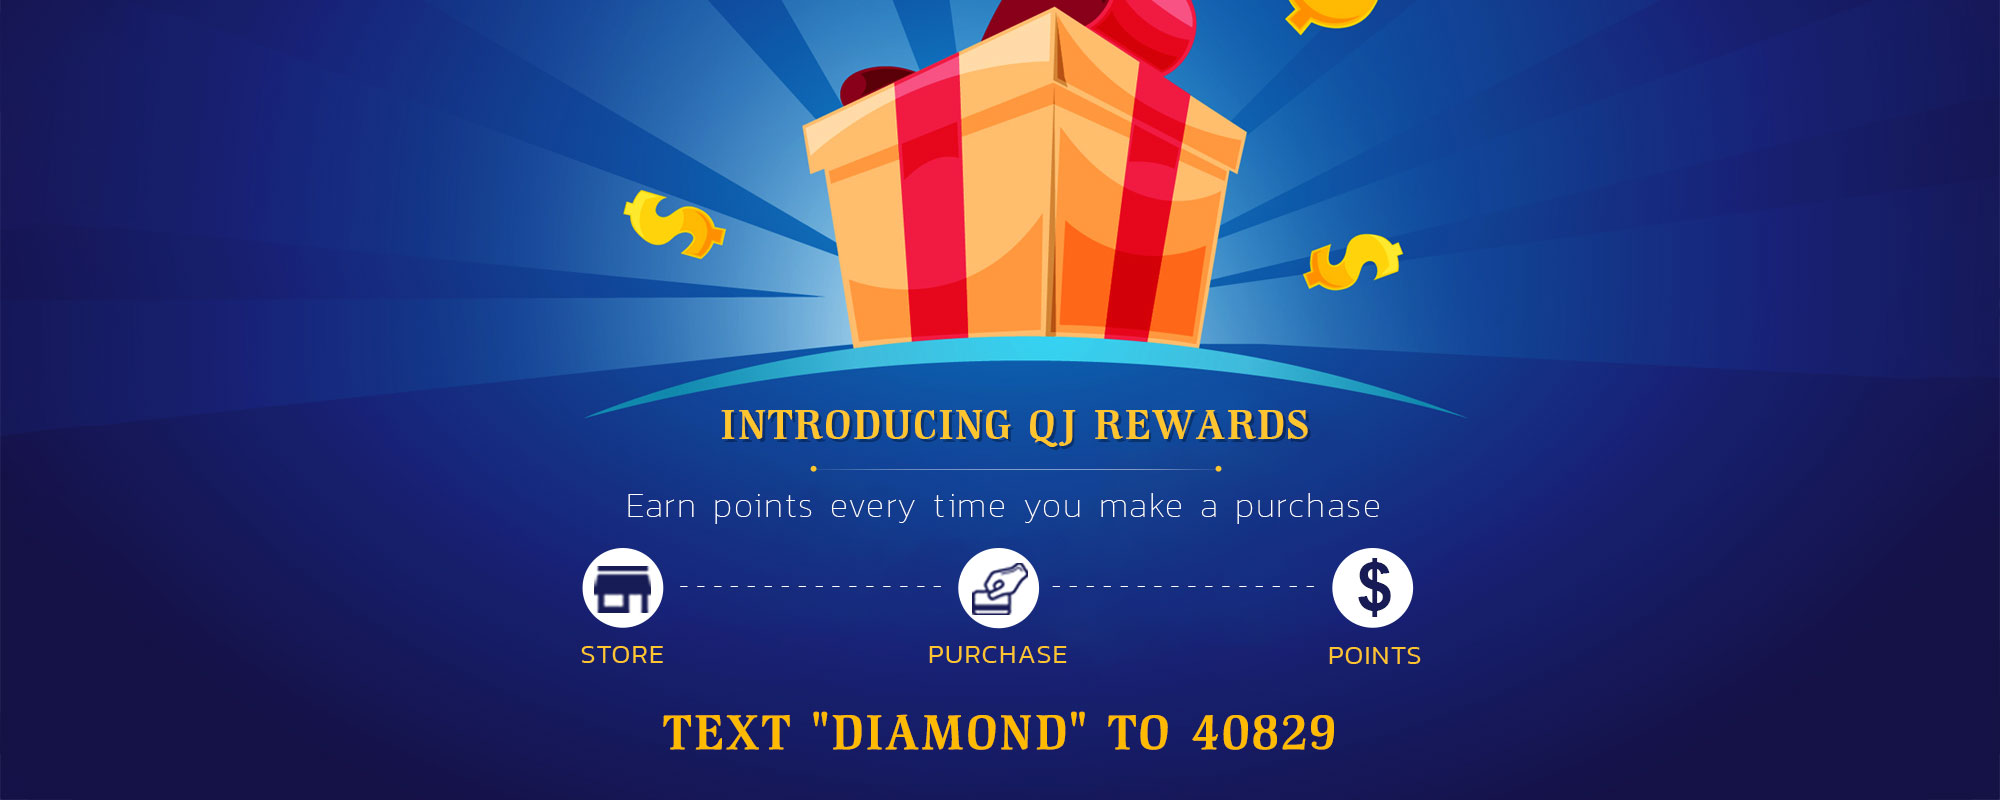 Make A Purchase And Earn Points At Quality Jewelers